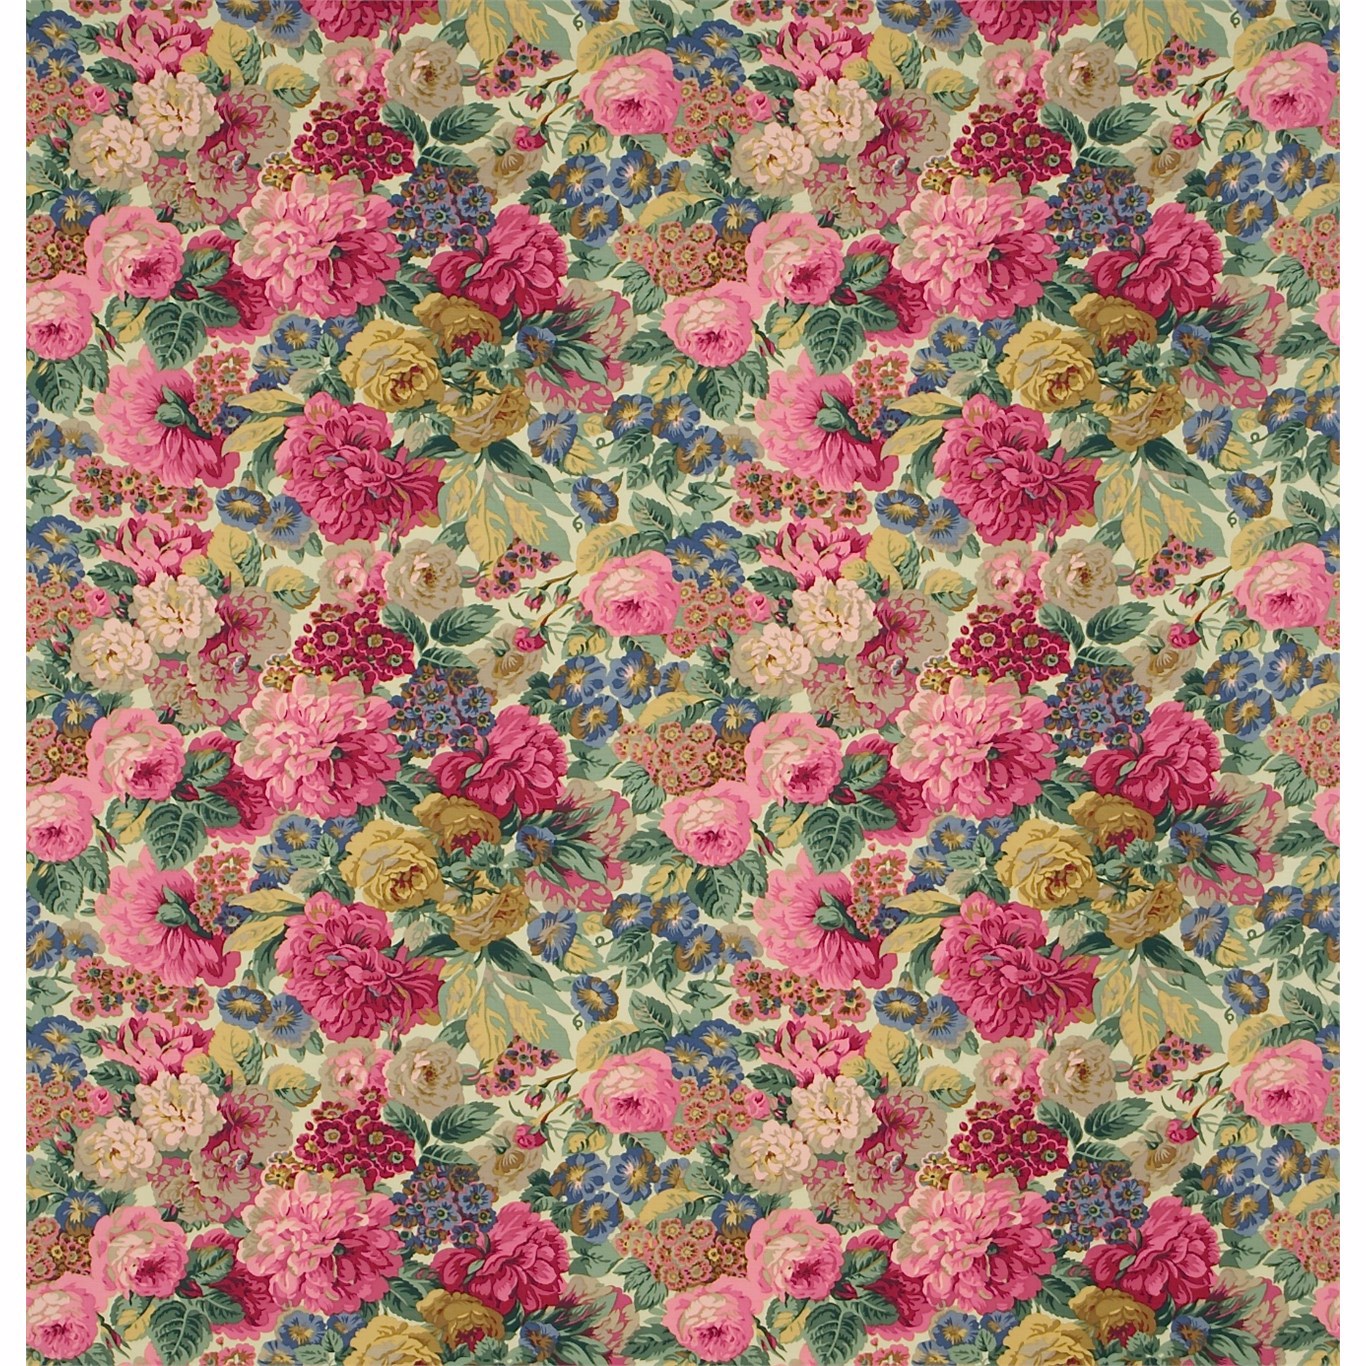 Rose & Peony Red (Linen) Fabric by SAN